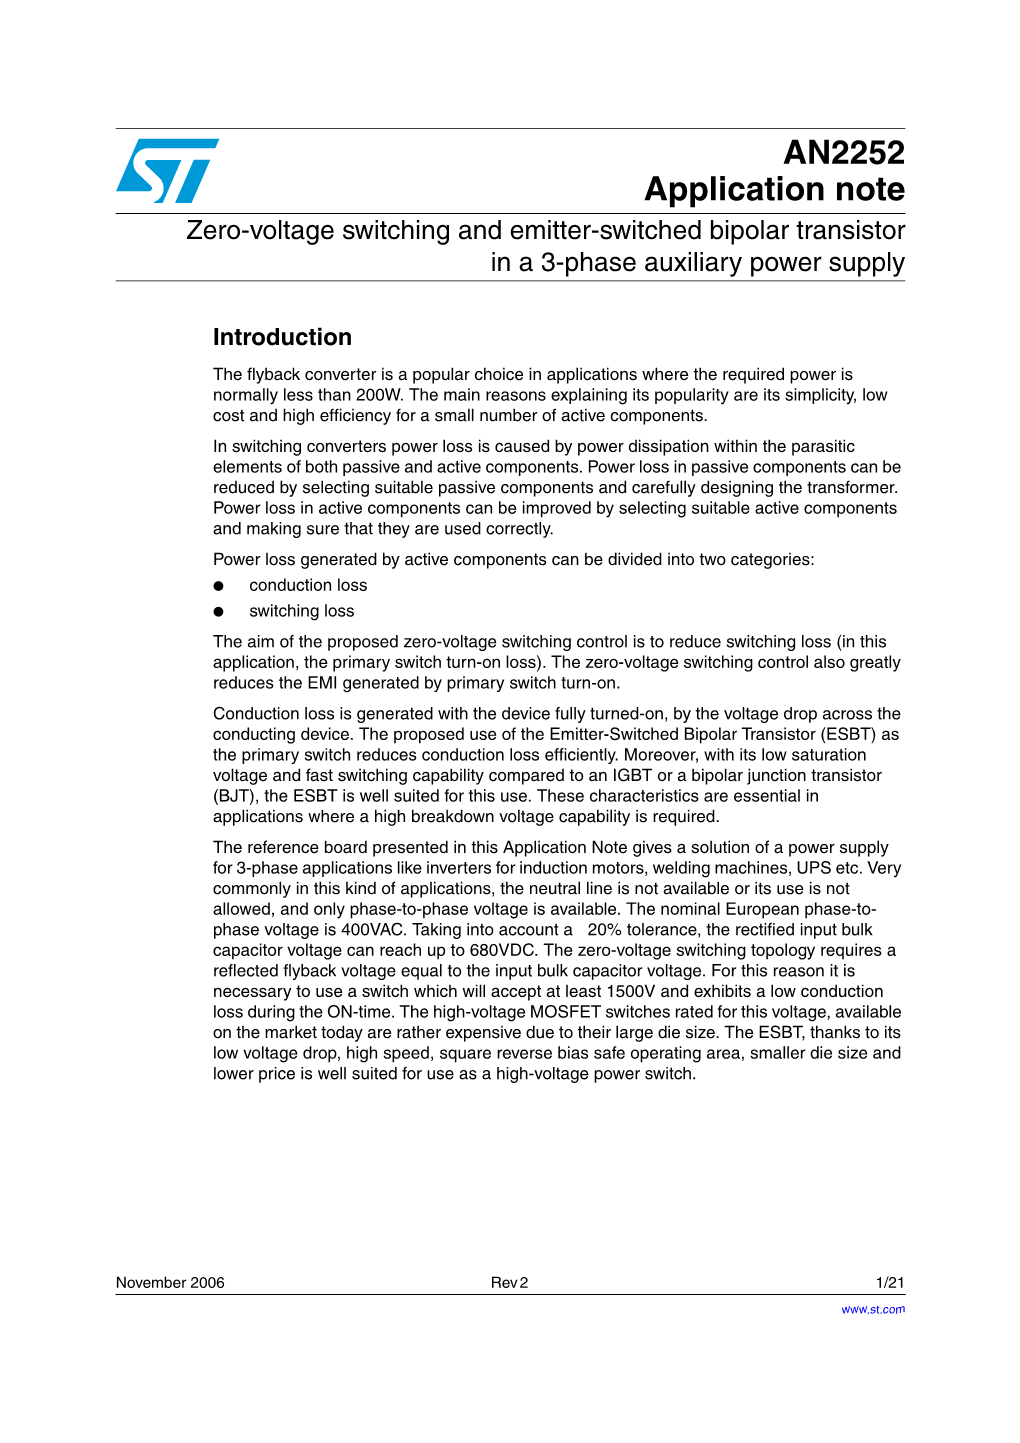 Zero-Voltage Switching and Emitter-Switched Bipolar Transistor in a 3-Phase Auxiliary Power Supply